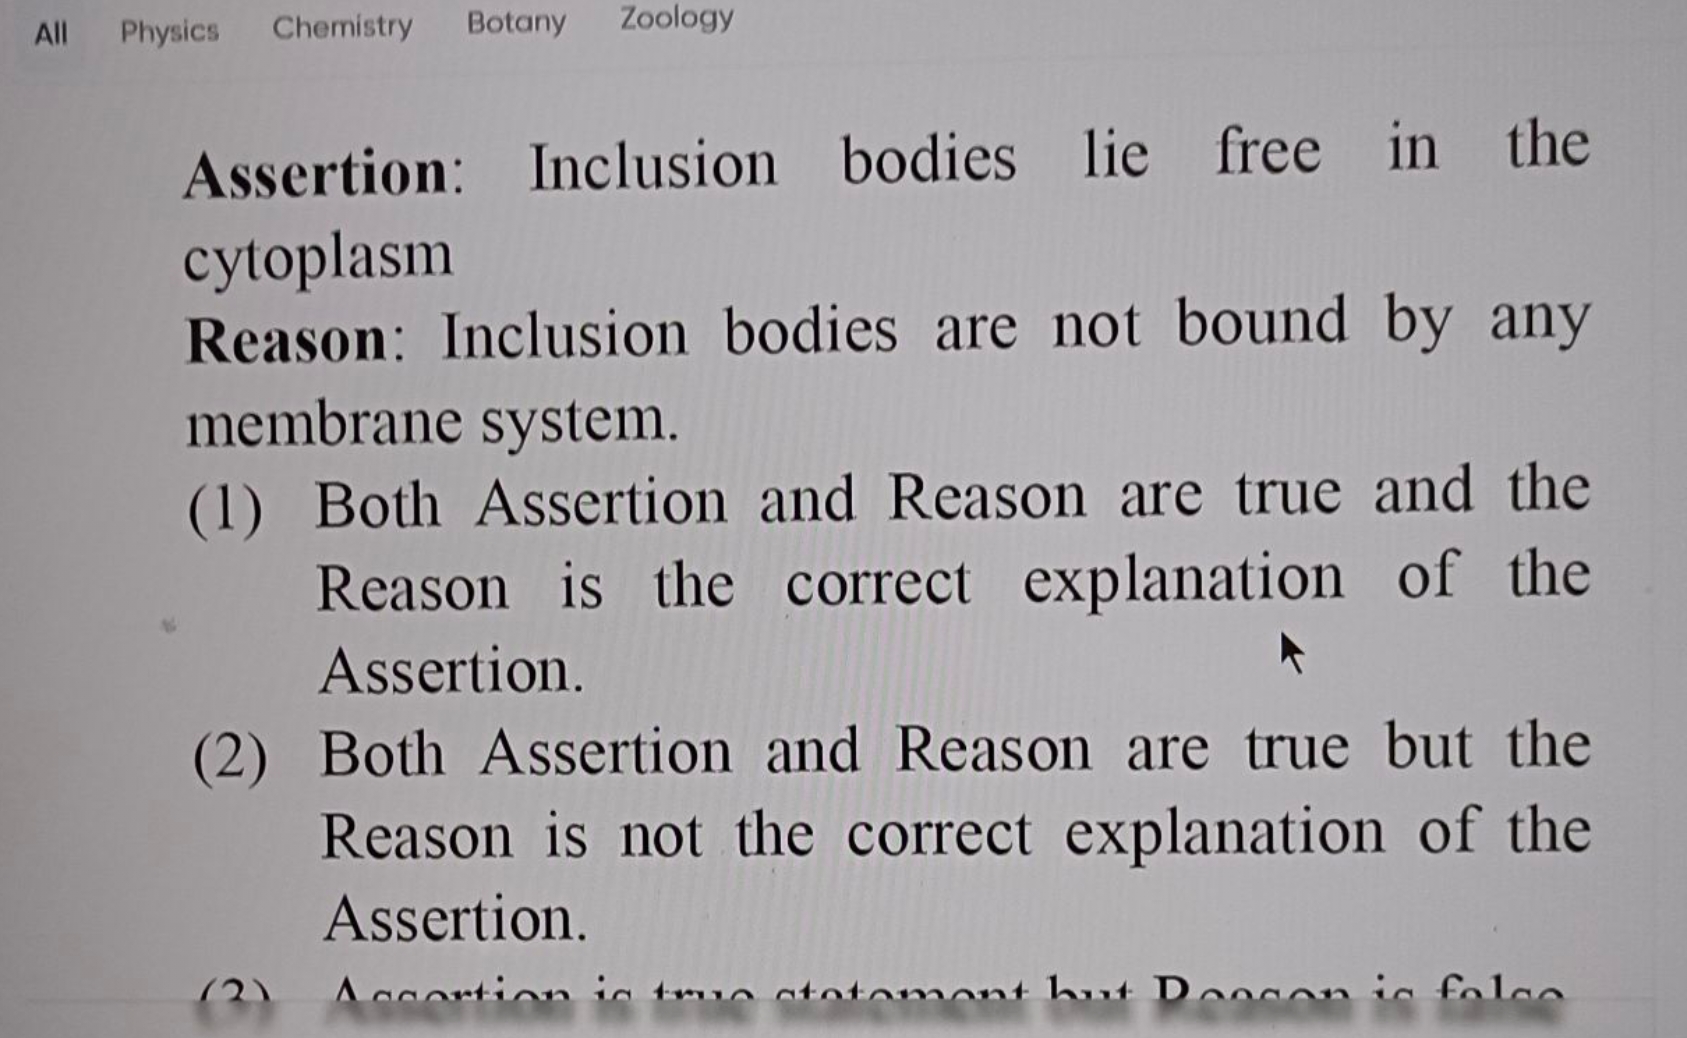 Assertion: Inclusion bodies lie free in the cytoplasm